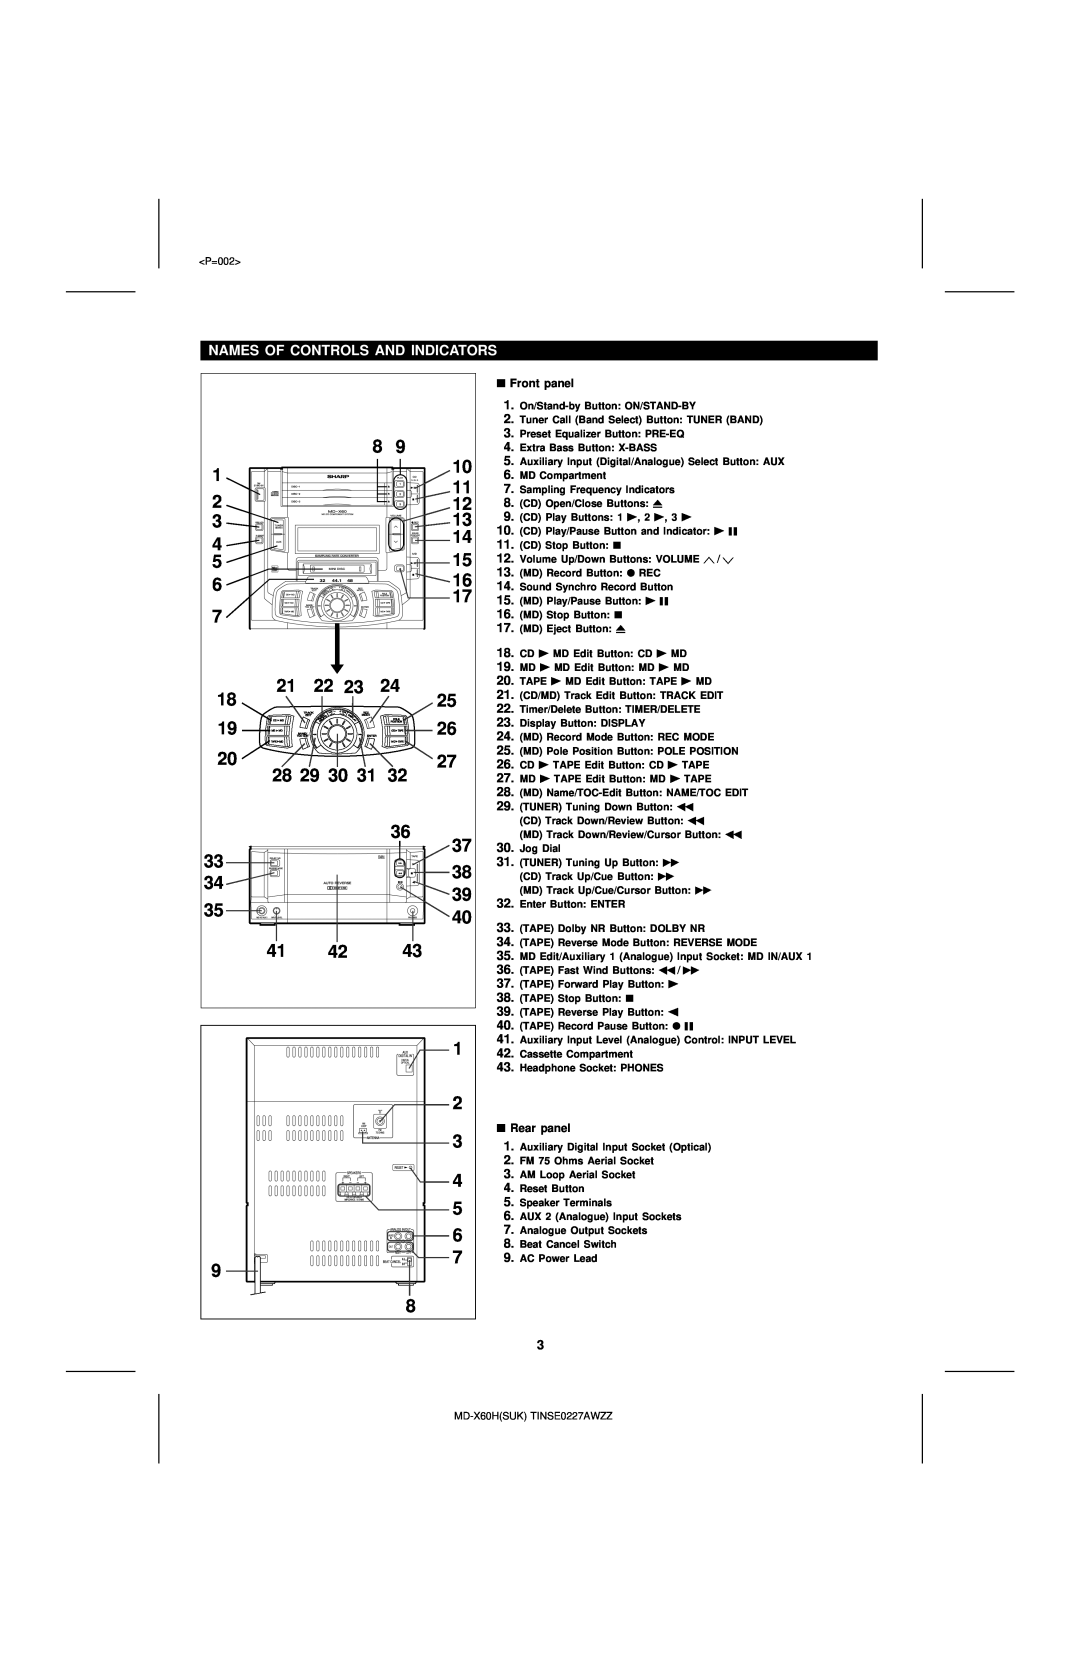 Sharp MD-X60H operation manual Names Of Controls And Indicators, Front panel, Rear panel 